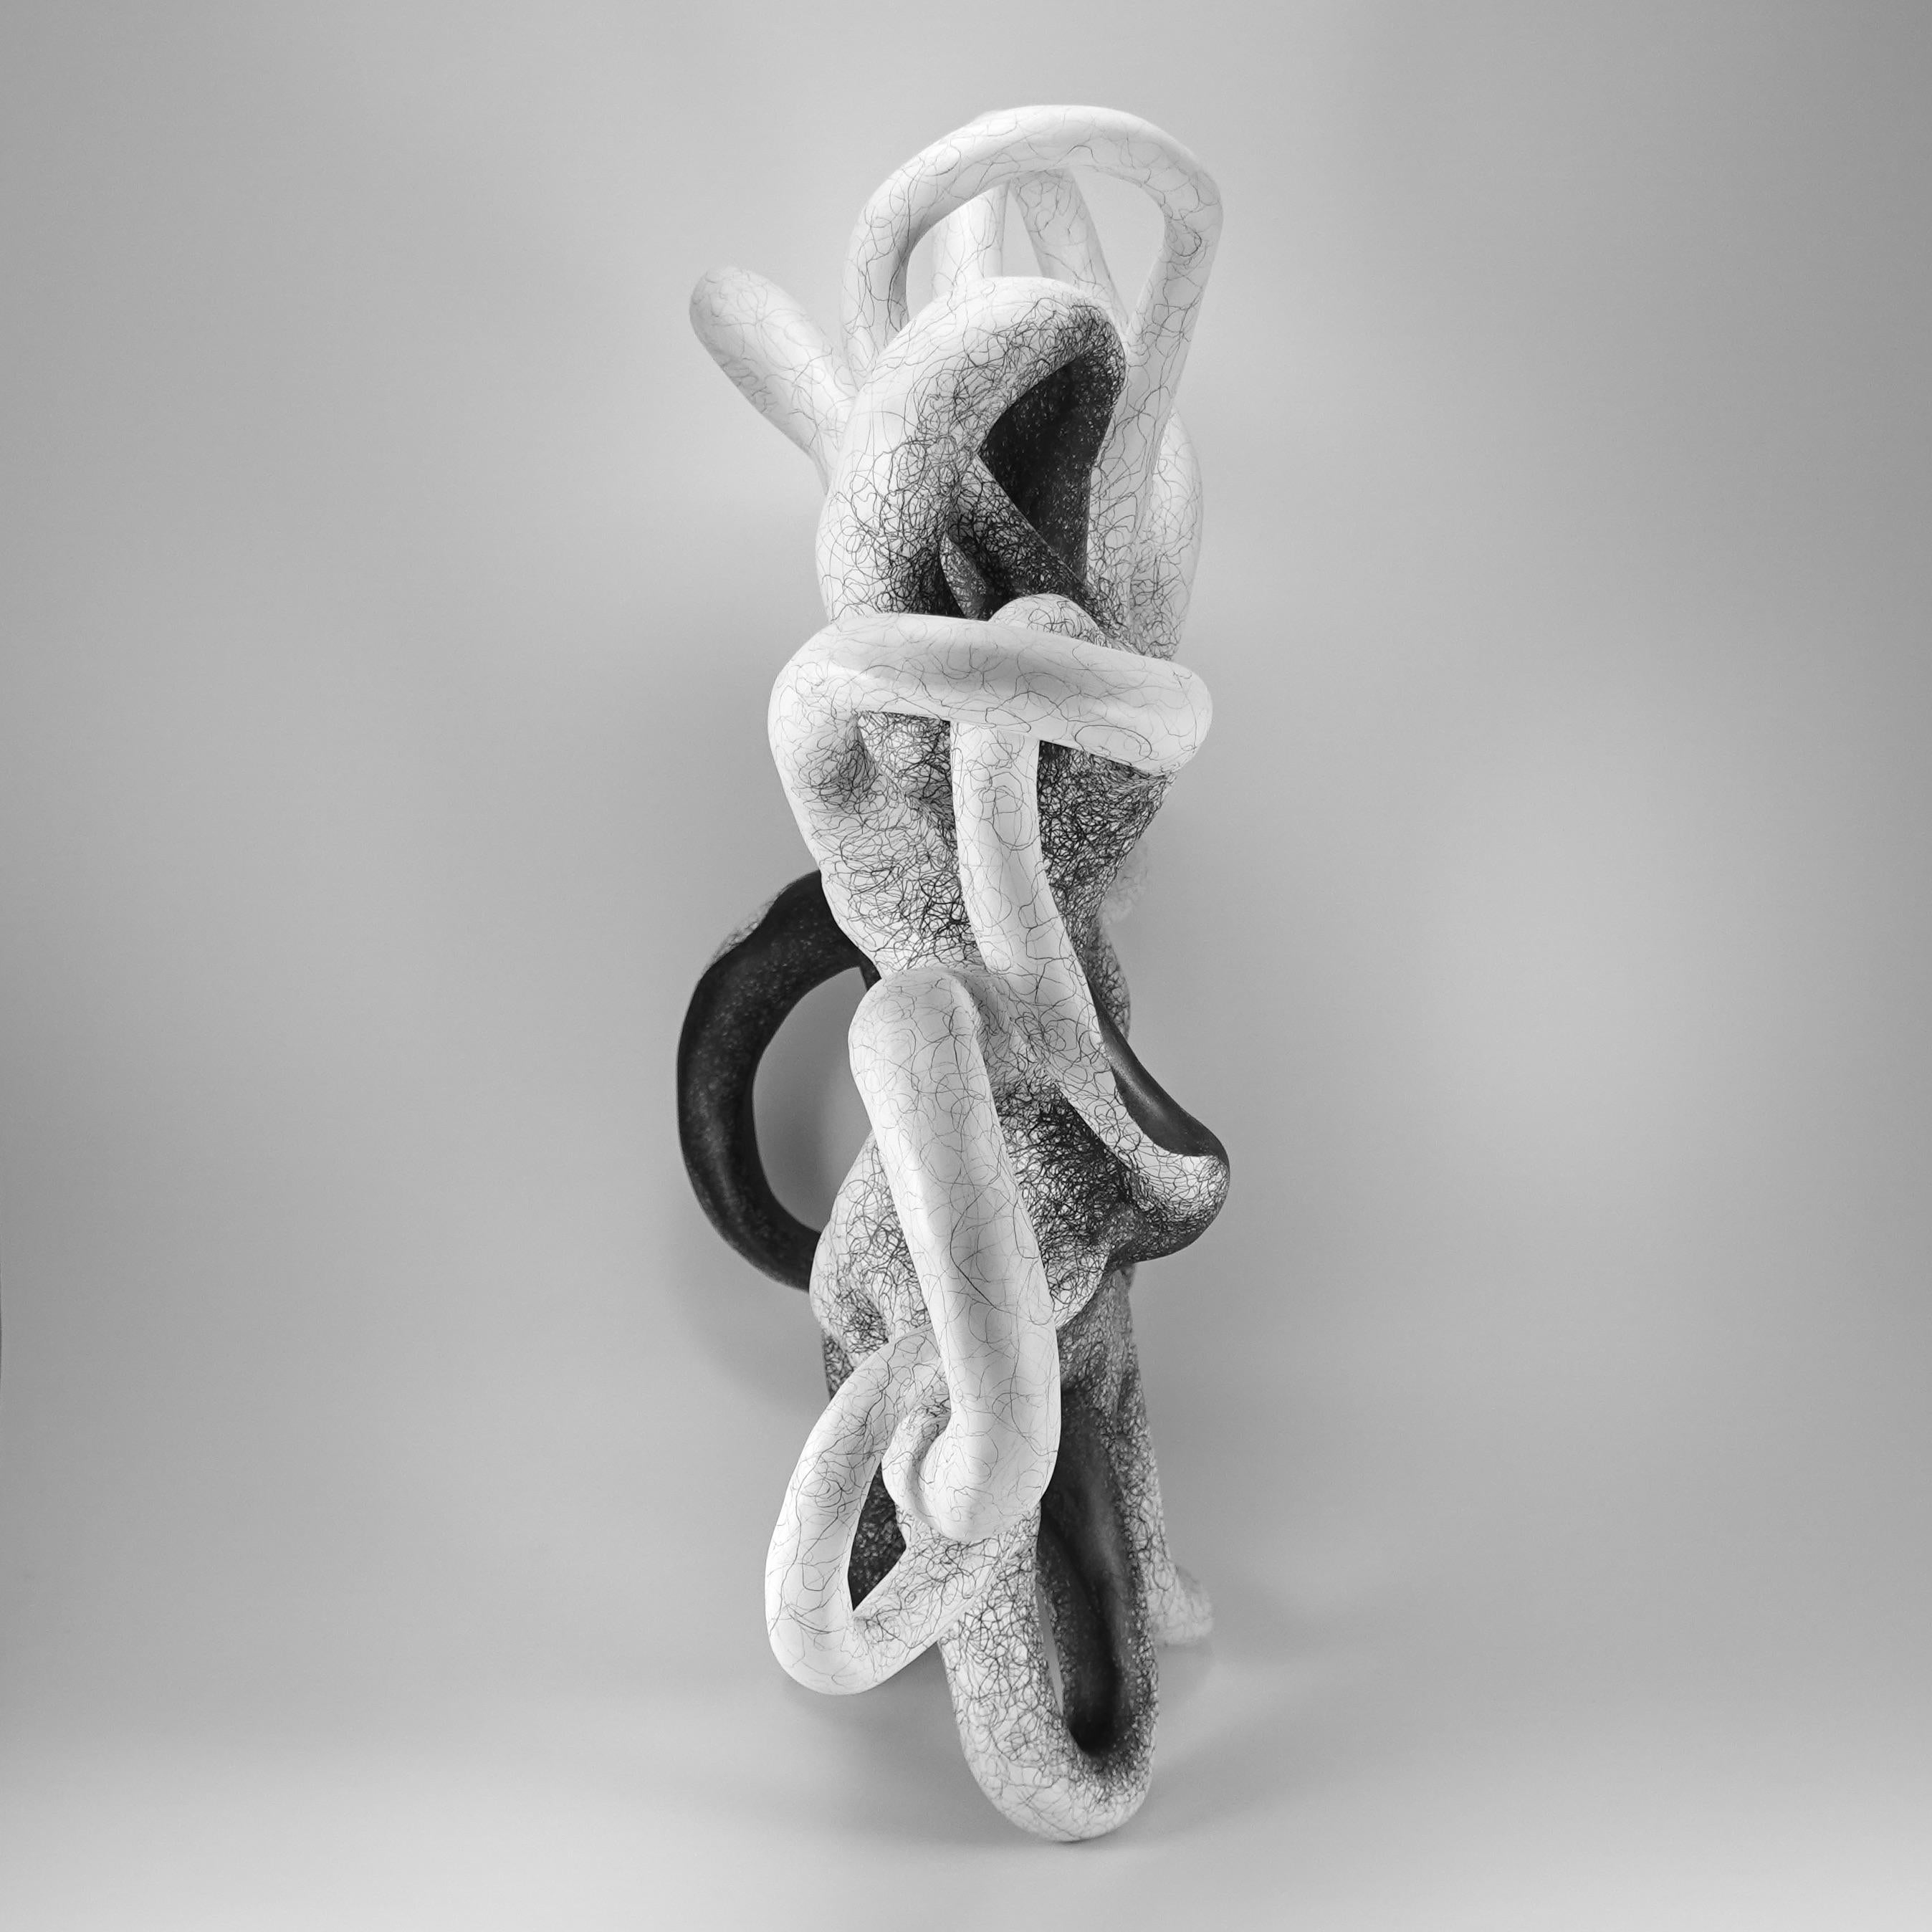 
“My biomorphic abstractions range from intimate to immersive in scale, referencing our interconnectedness. 
 Building curvilinear ceramic sculpture and then drawing intertwined graphite lines on the surface, creates energy that seems to emanate